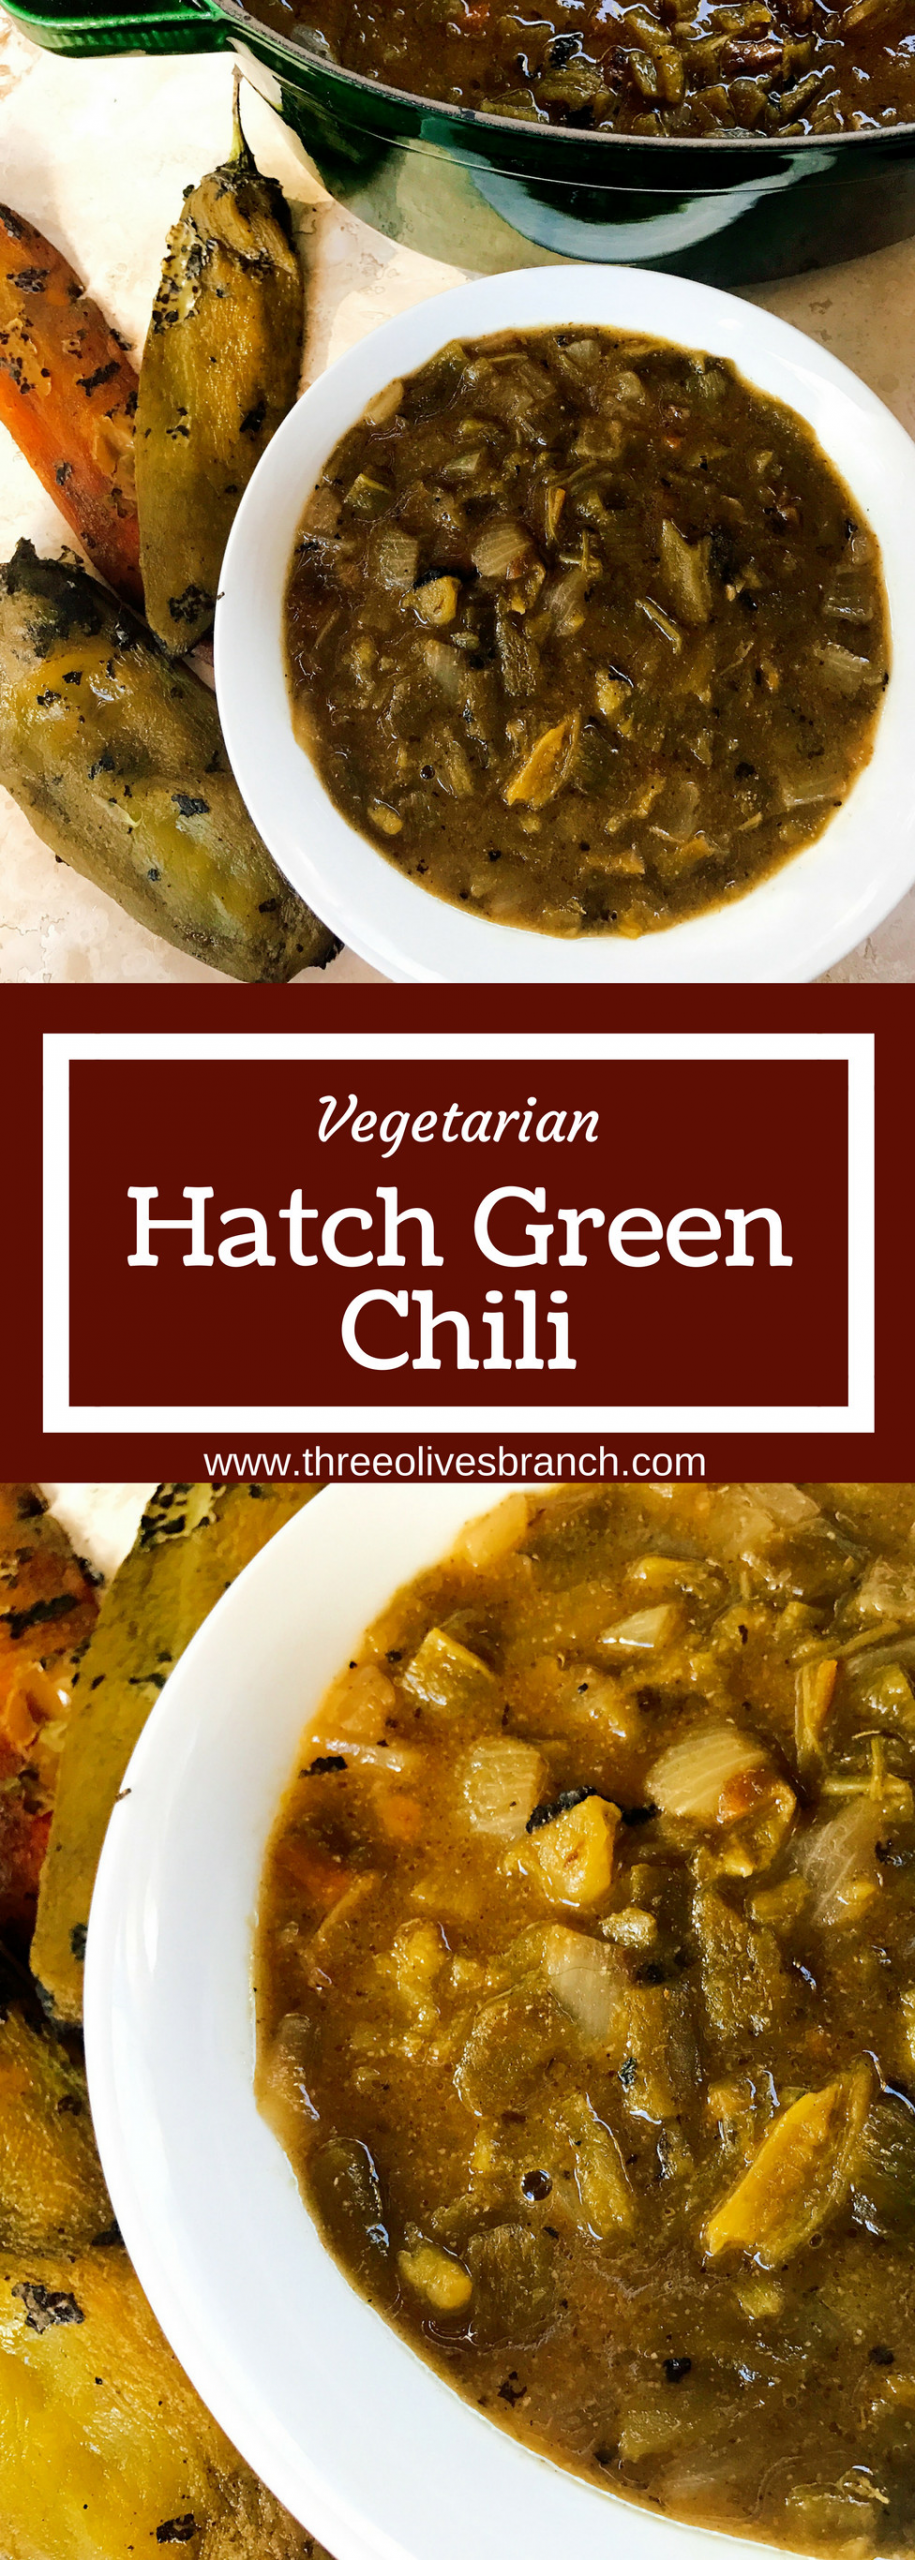 Vegetarian Green Chili Recipes
 Ve arian Hatch Green Chili Three Olives Branch